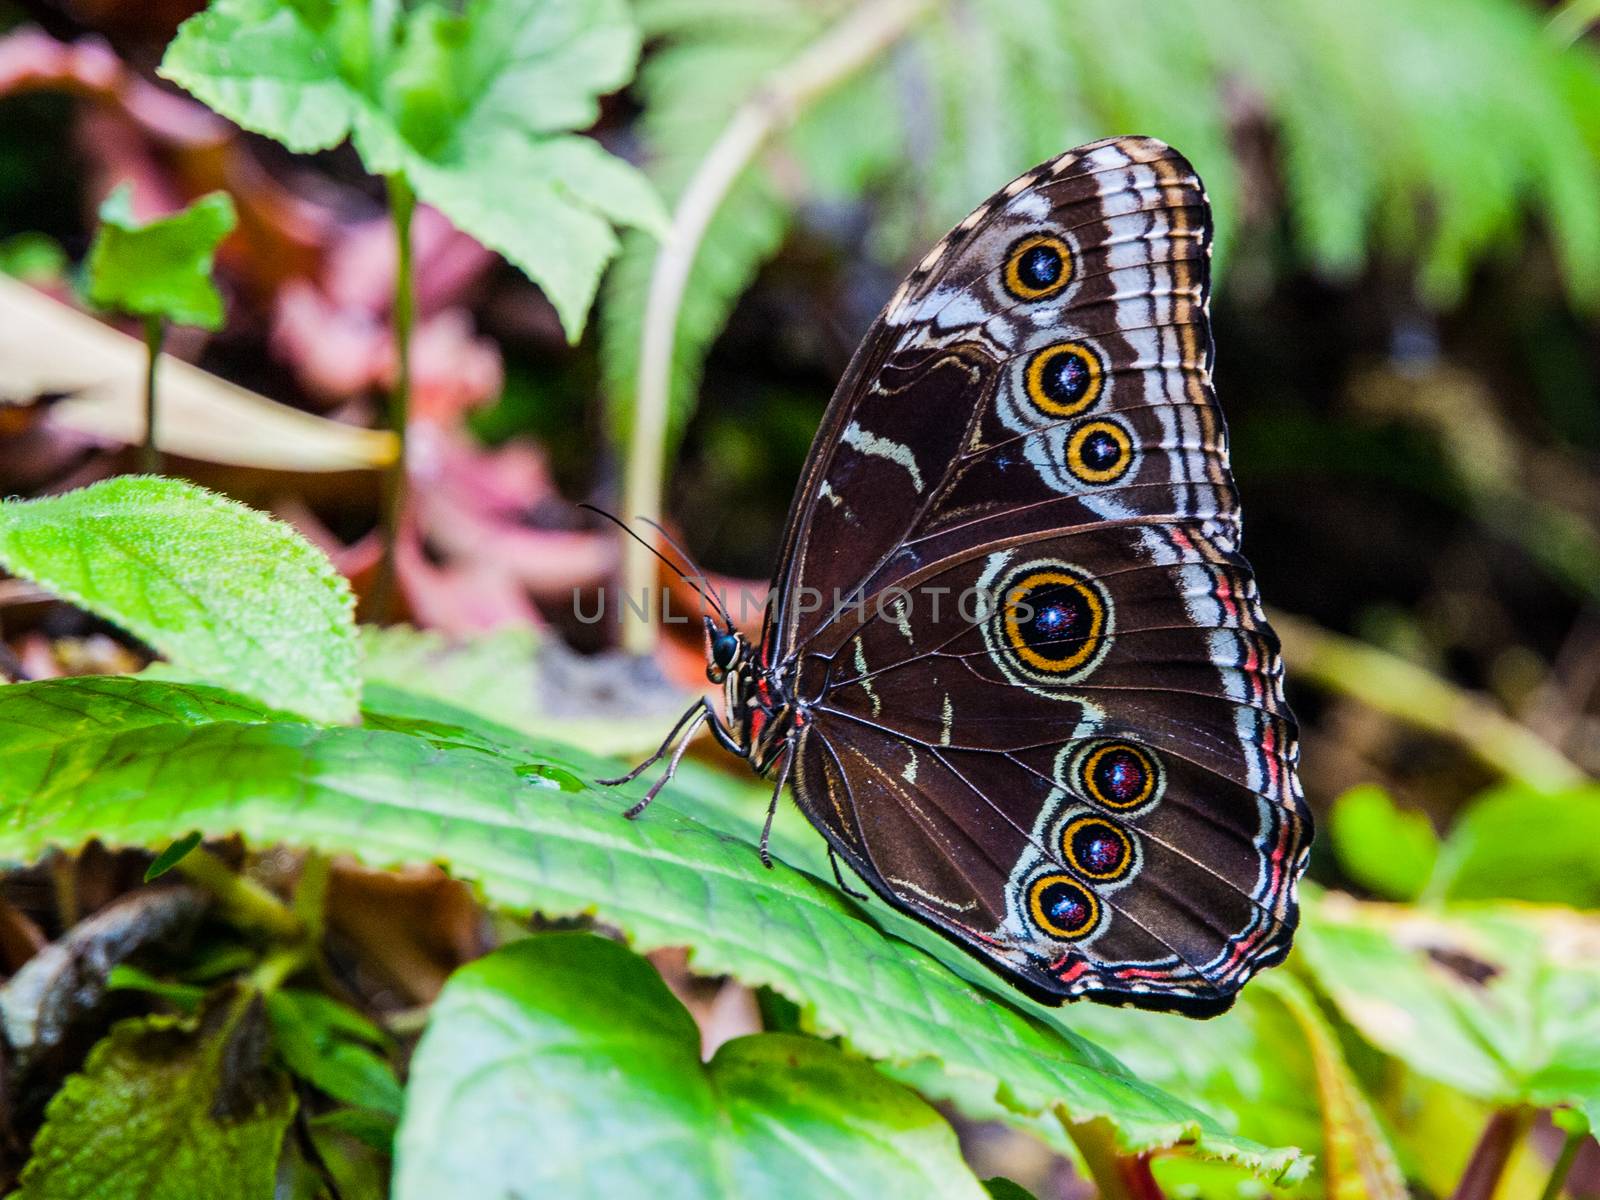 Morpho butterfly with closed wings